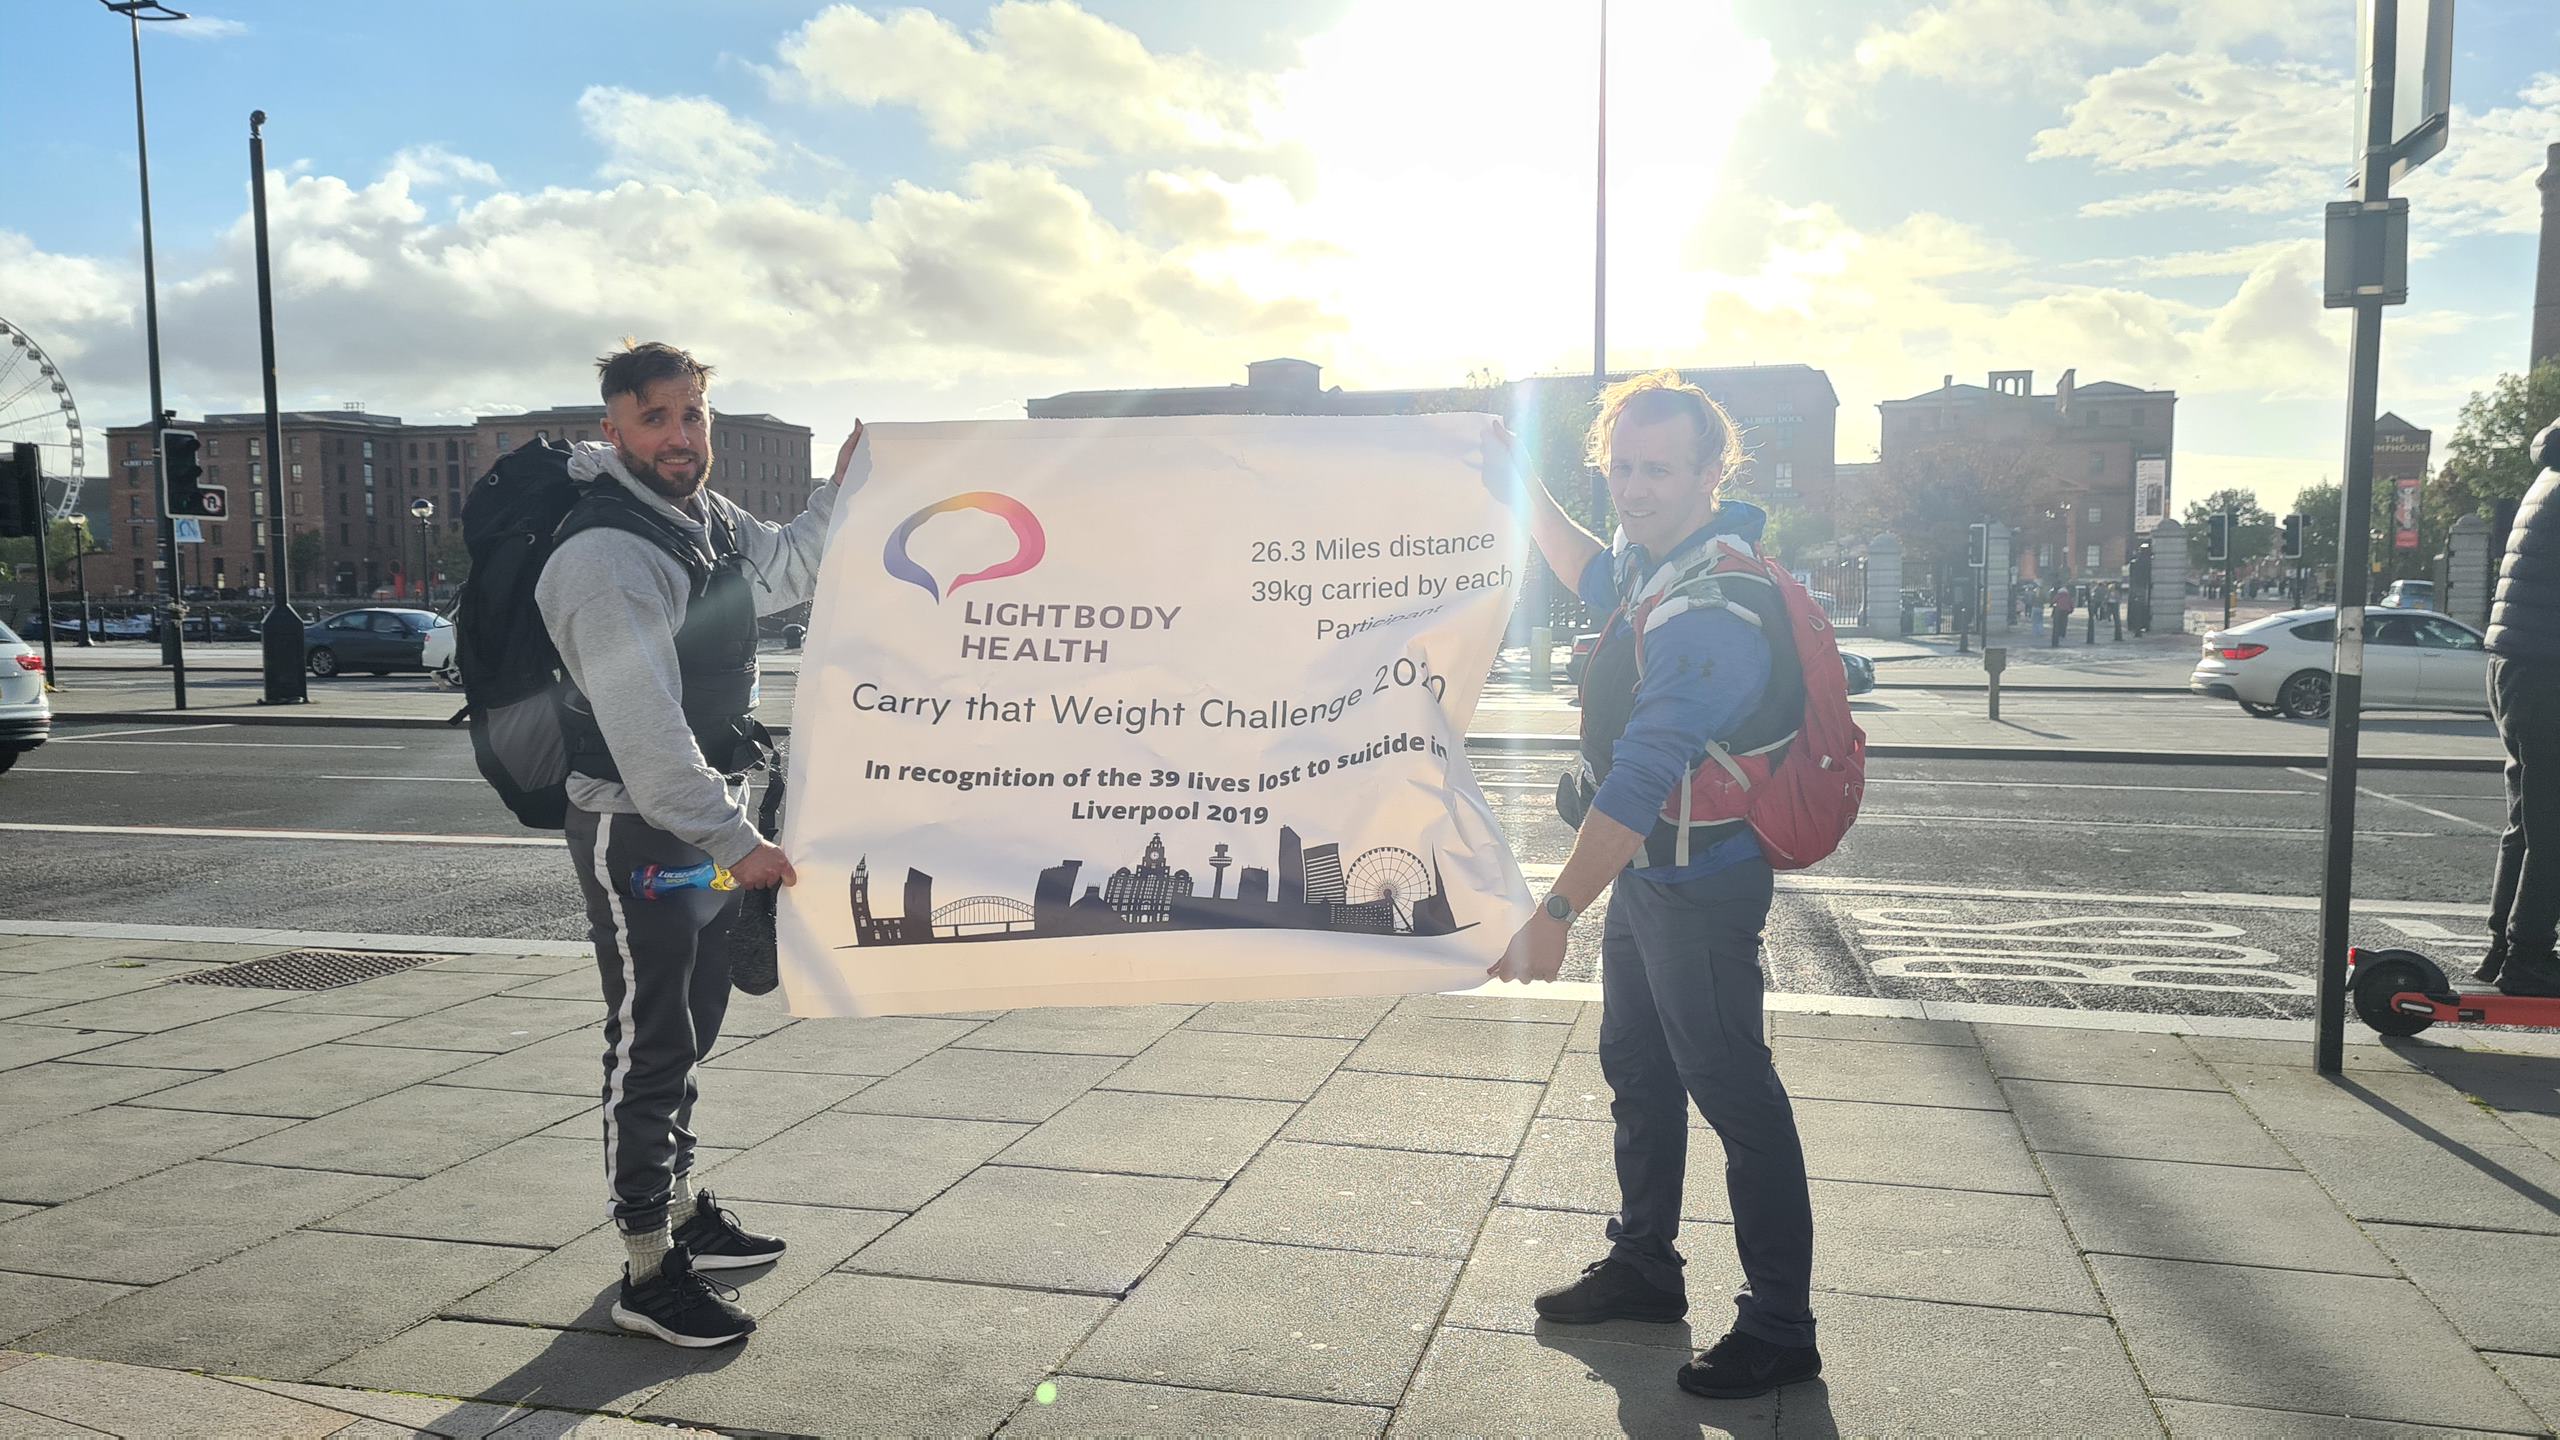 Carry the Weight Challenge 2020